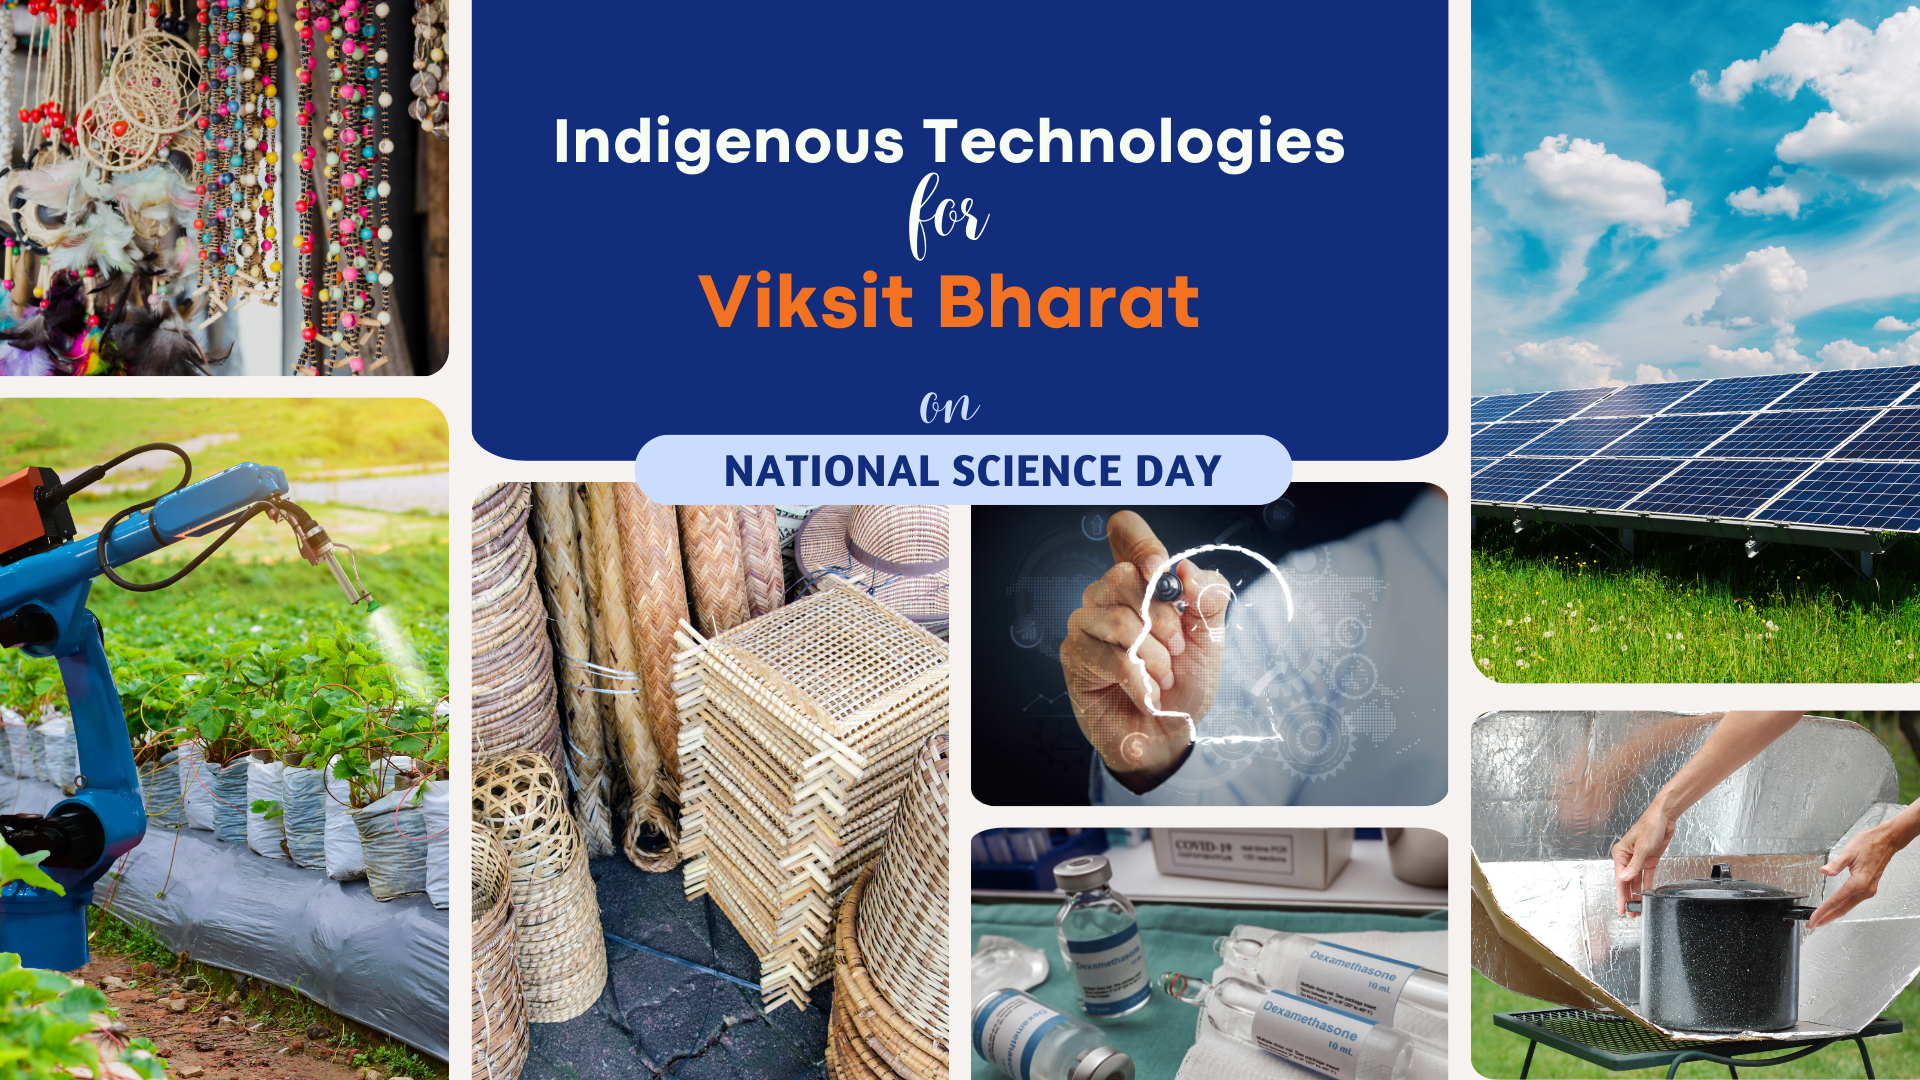 Indigenous Technologies for Viksit Bharat on National Science Day – Complete Guide!